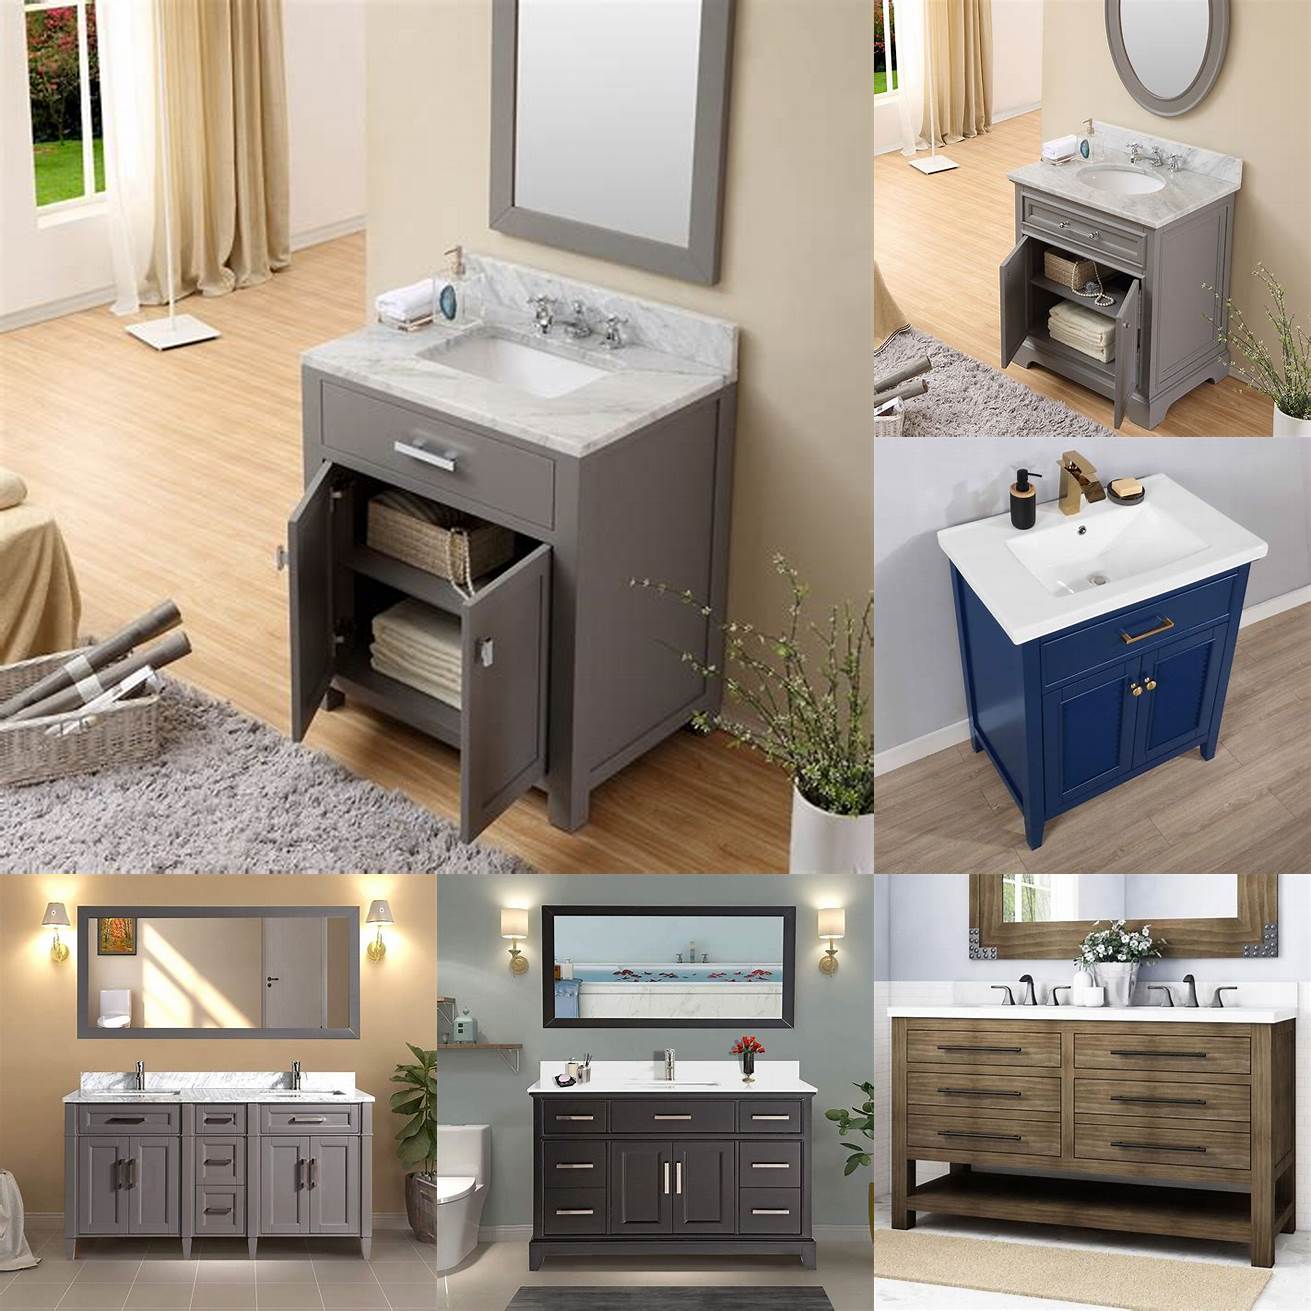 1 Affordable Prices Overstock offers some of the best prices on bathroom vanities making it an affordable option for those on a budget